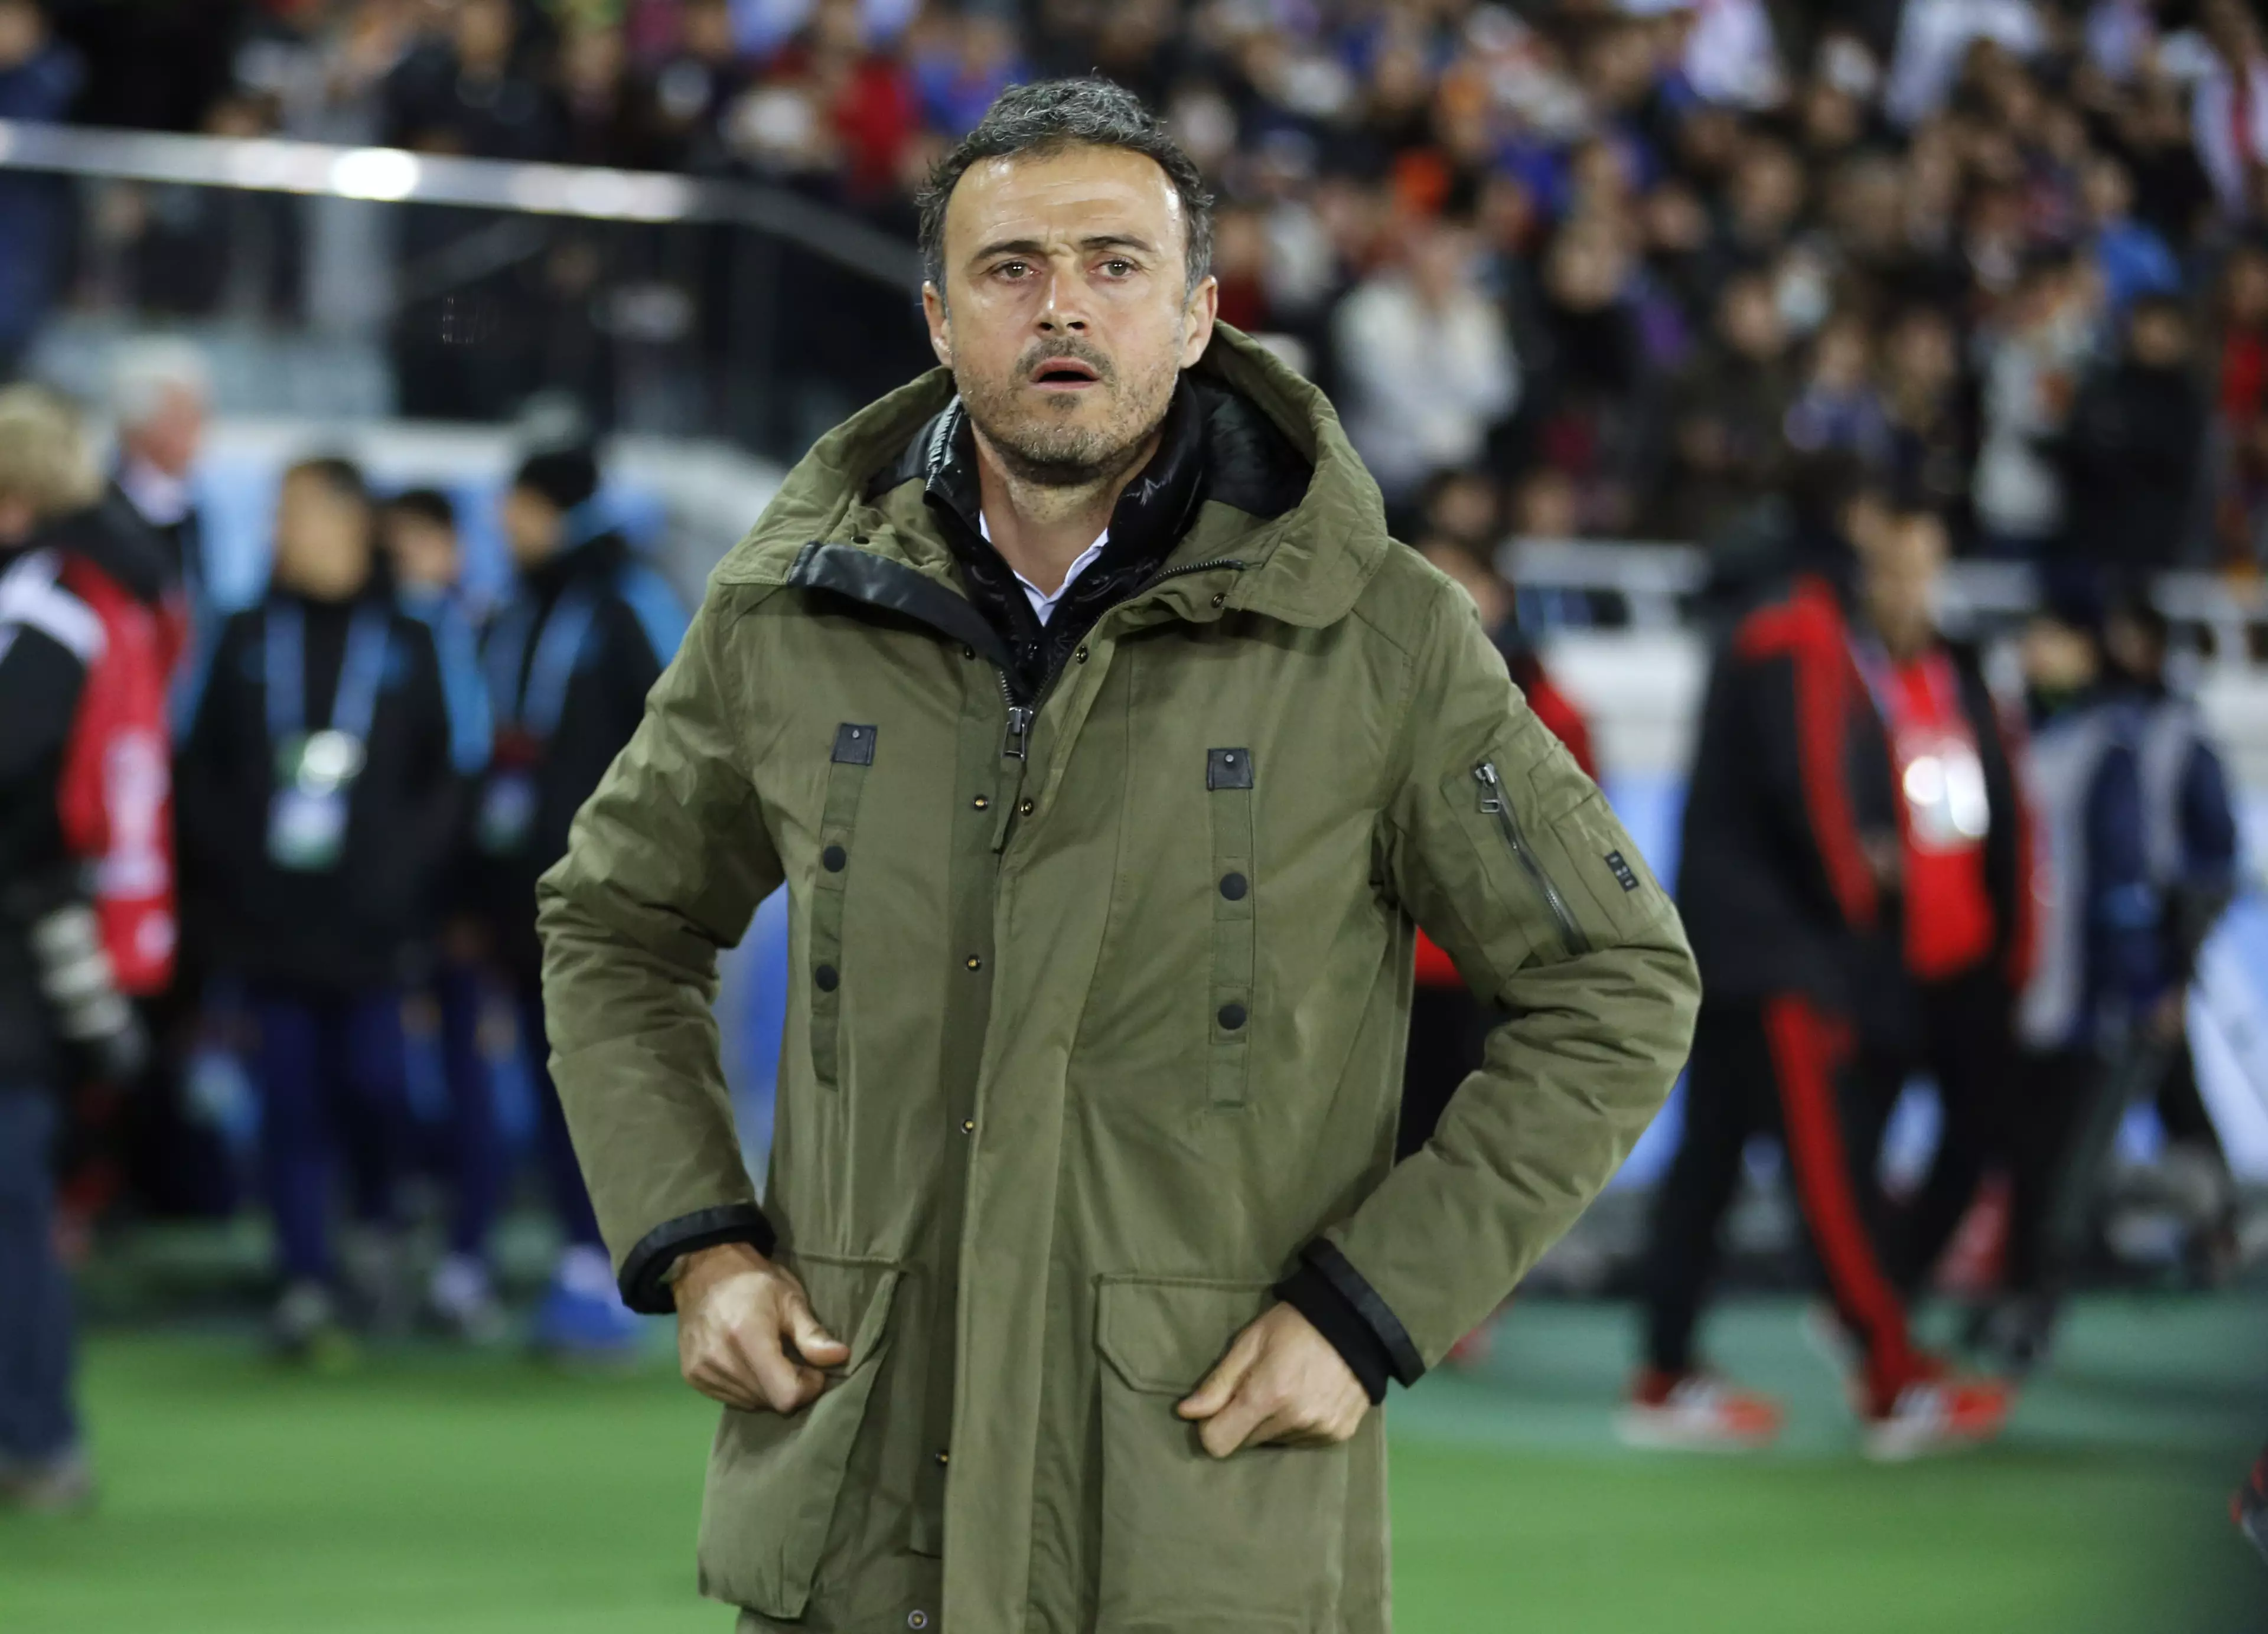 Luis Enrique and his very good jackets could be making their way to the dugout at Stamford Bridge, very soon. Images: PA